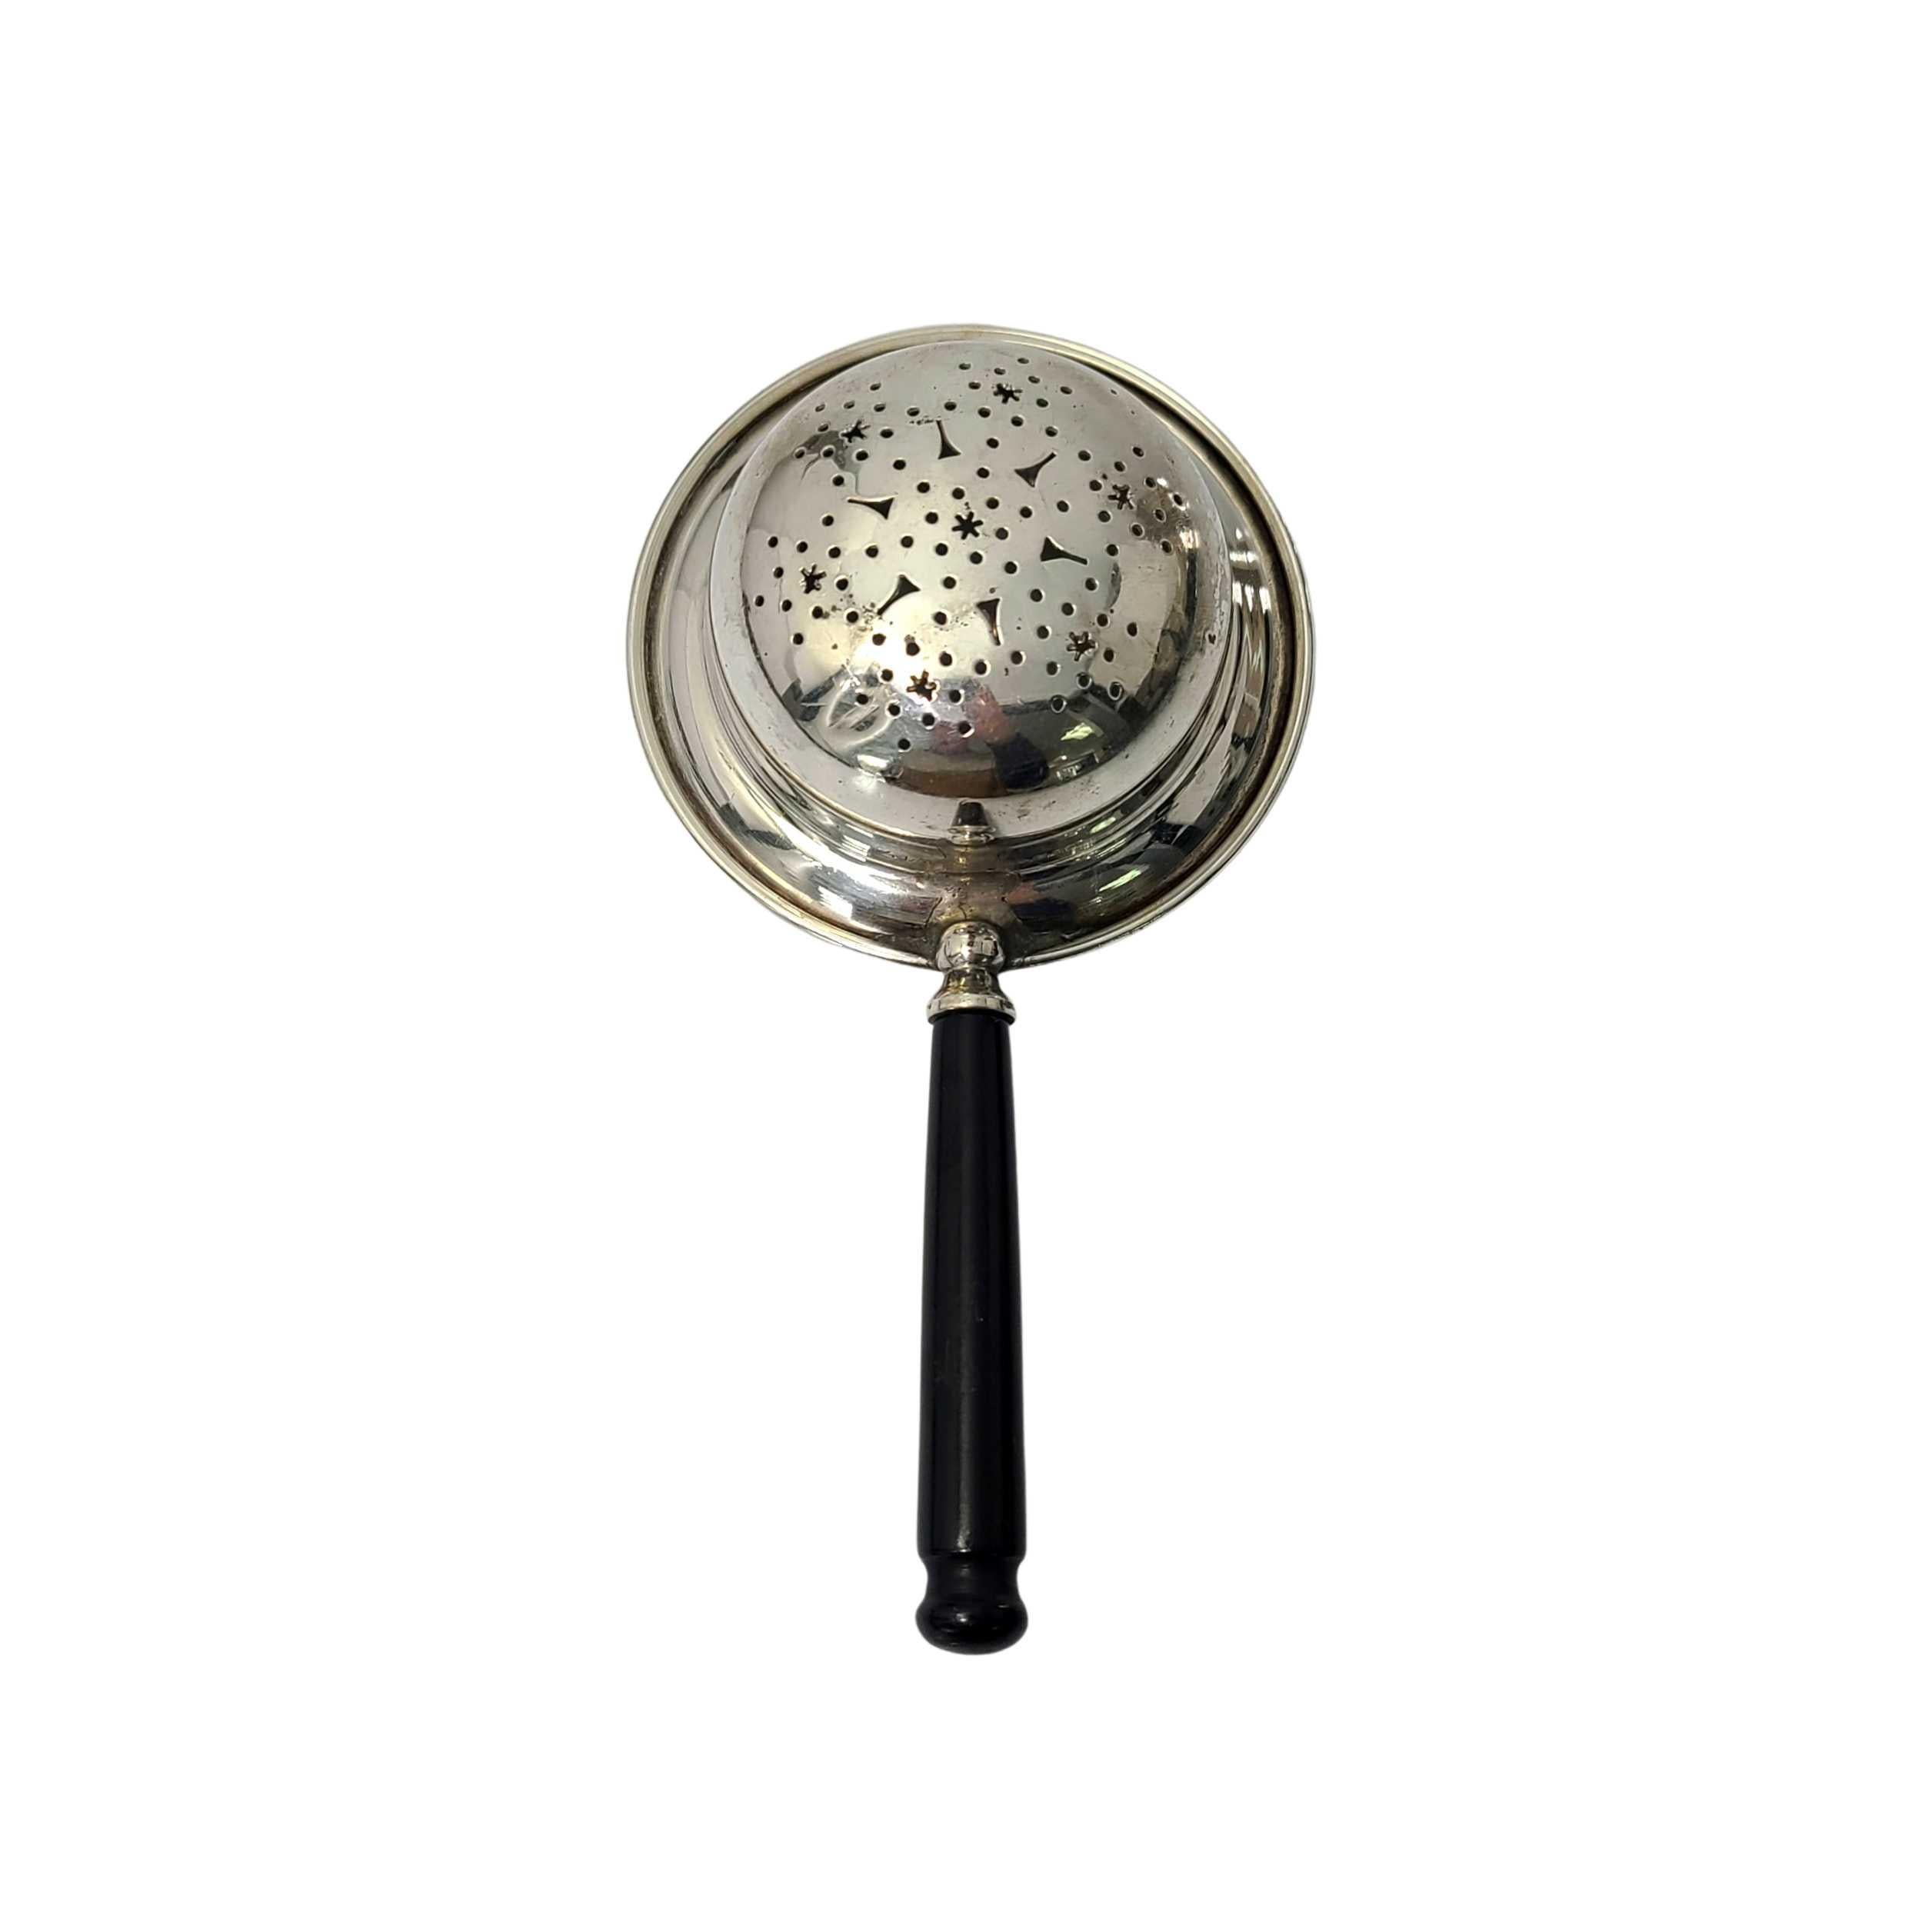 Vintage sterling silver tea strainer by Watson #47.

Watson was active from 1880-1955 specializing in souvenir spoons, vanity and novelty items. This tea strainer features a black handle and a pierced star design in the bowl.

Measures